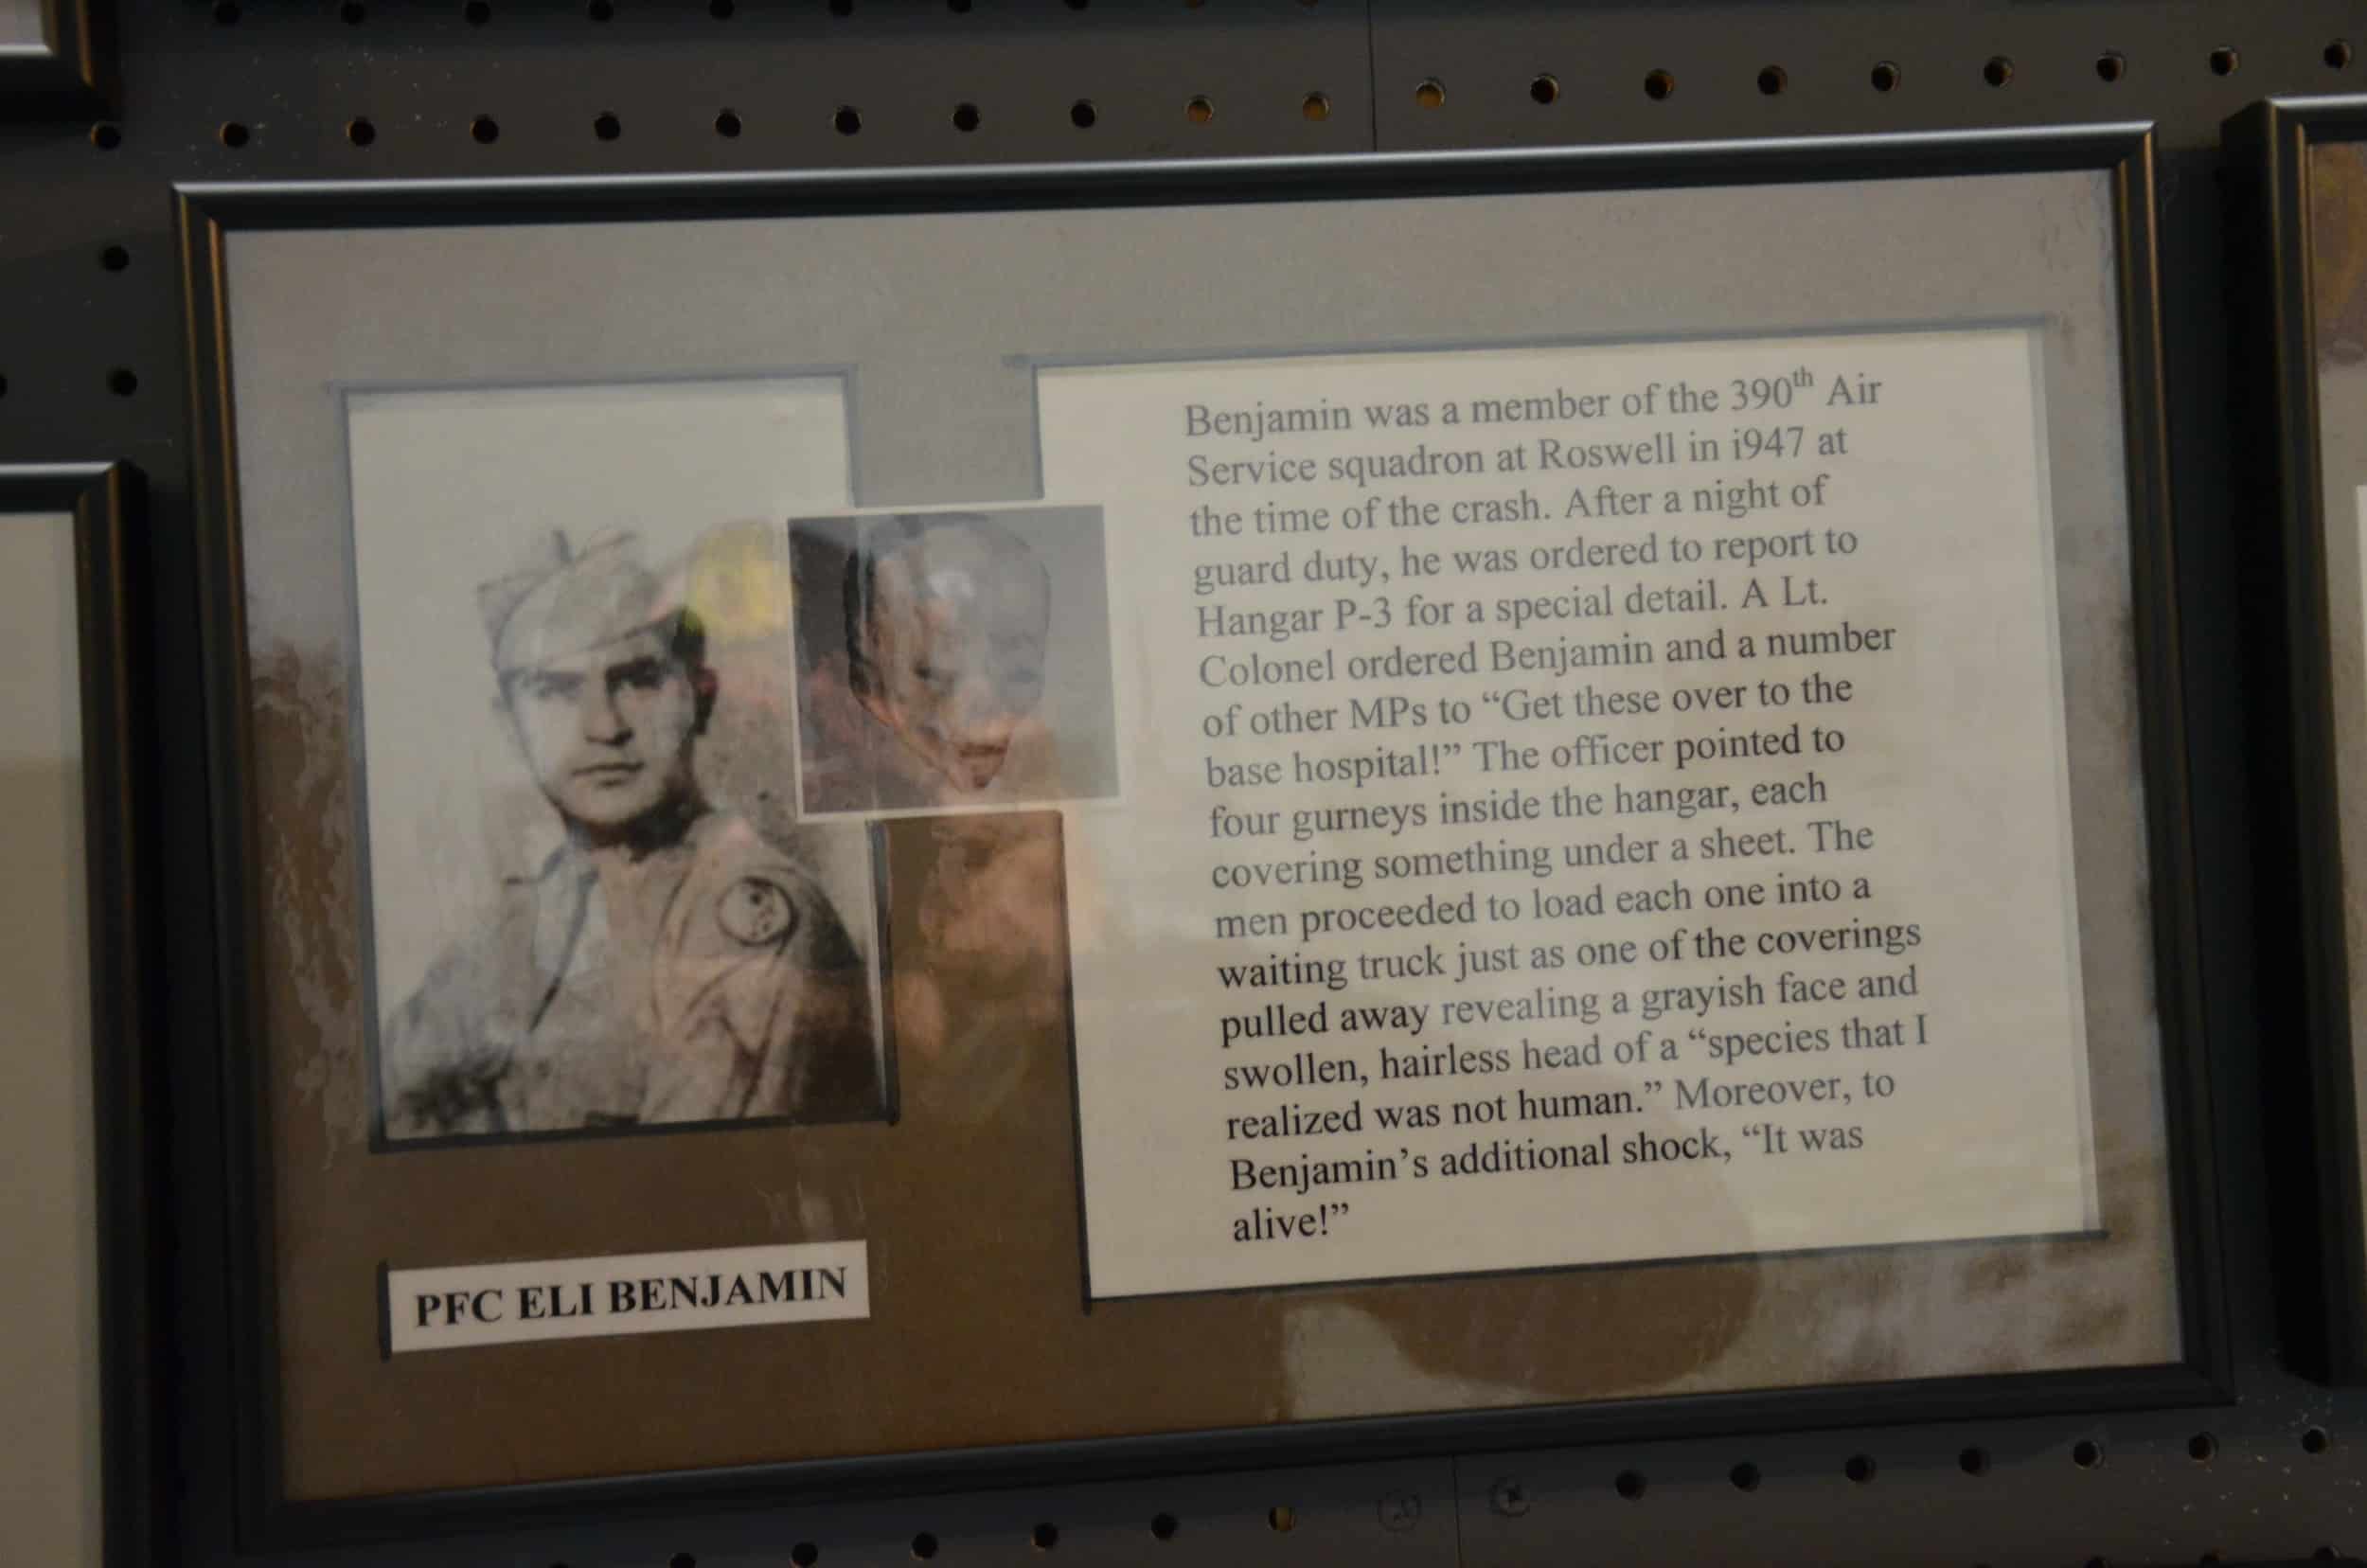 Eyewitness account of PFC Eli Benjamin at the International UFO Museum and Research Center in Roswell, New Mexico